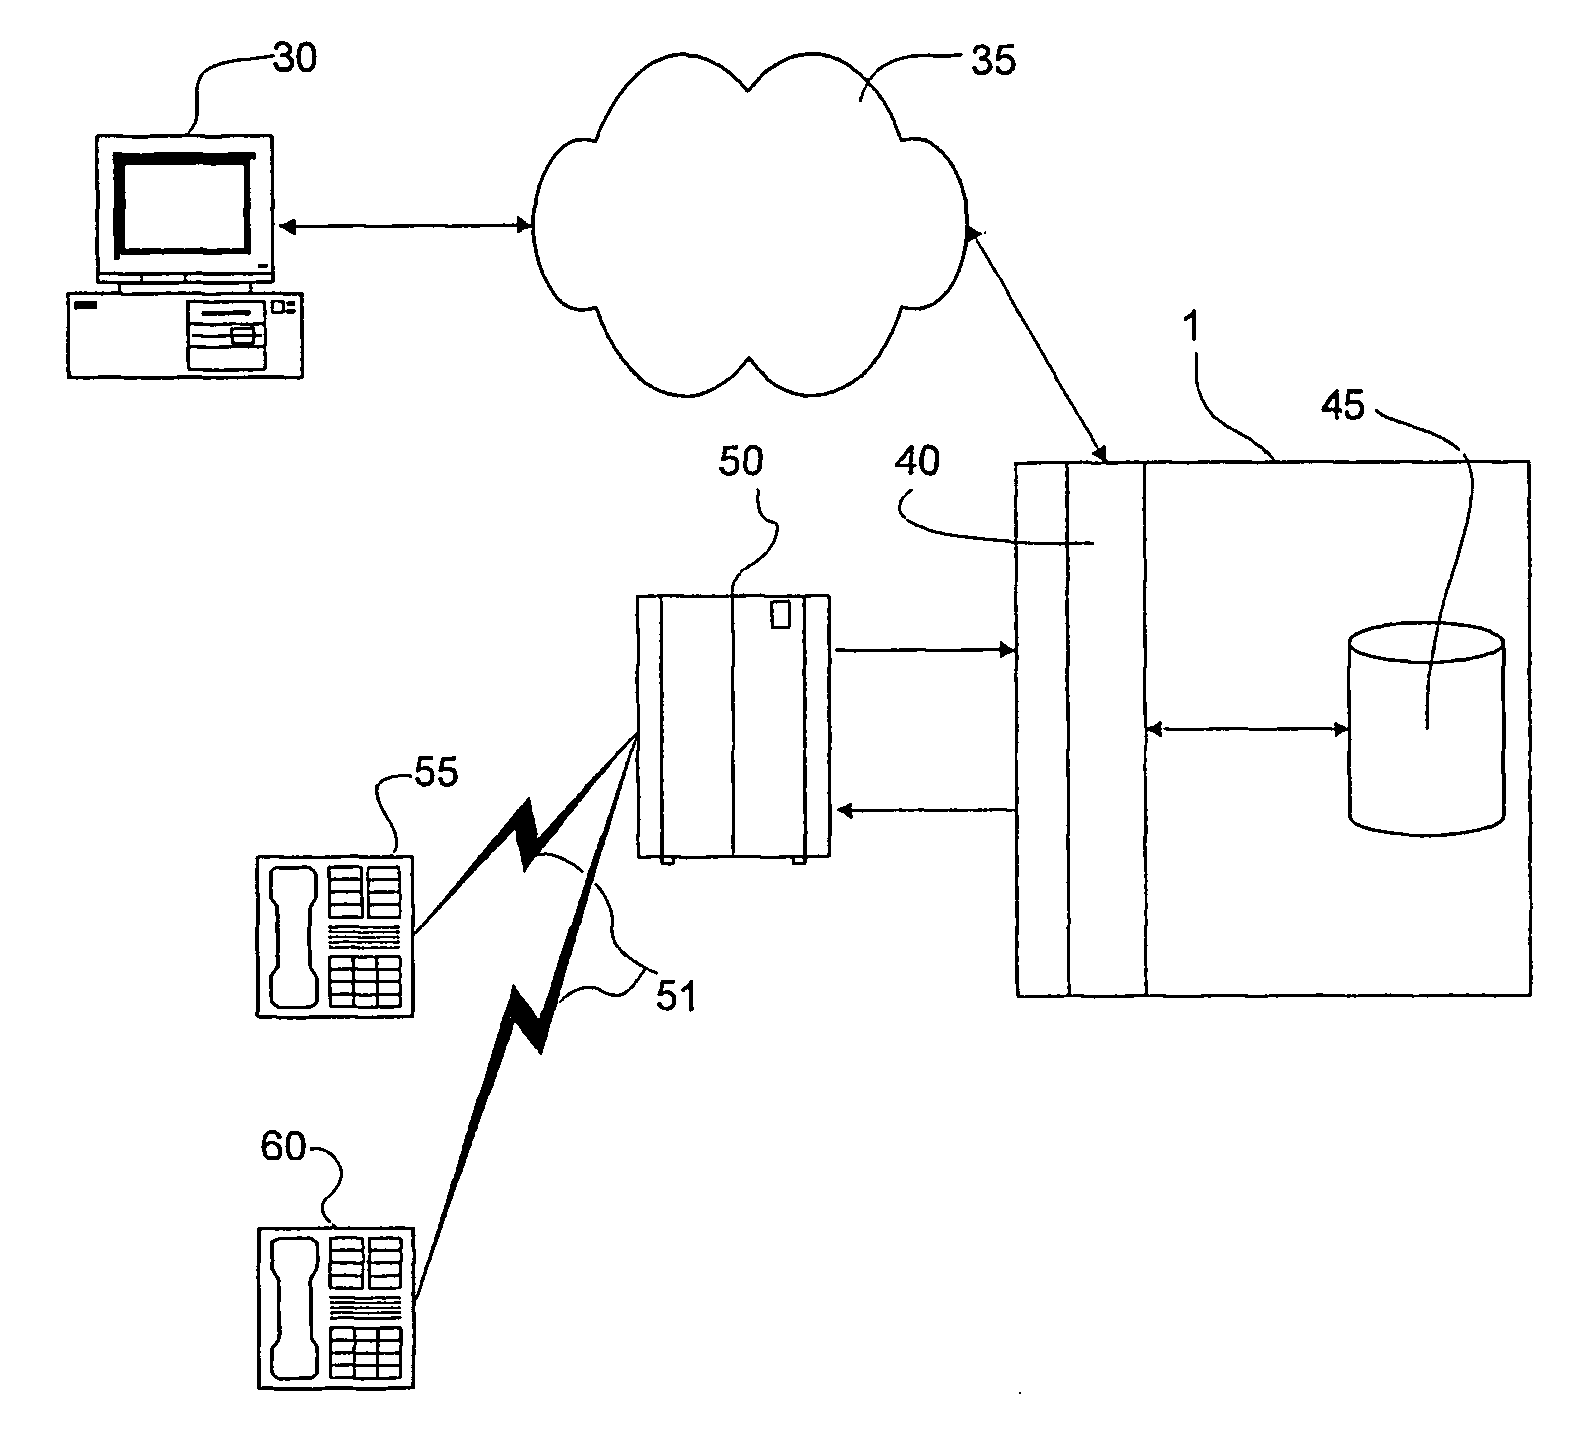 Apparatus, systems and methods for managing incoming and outgoing communication